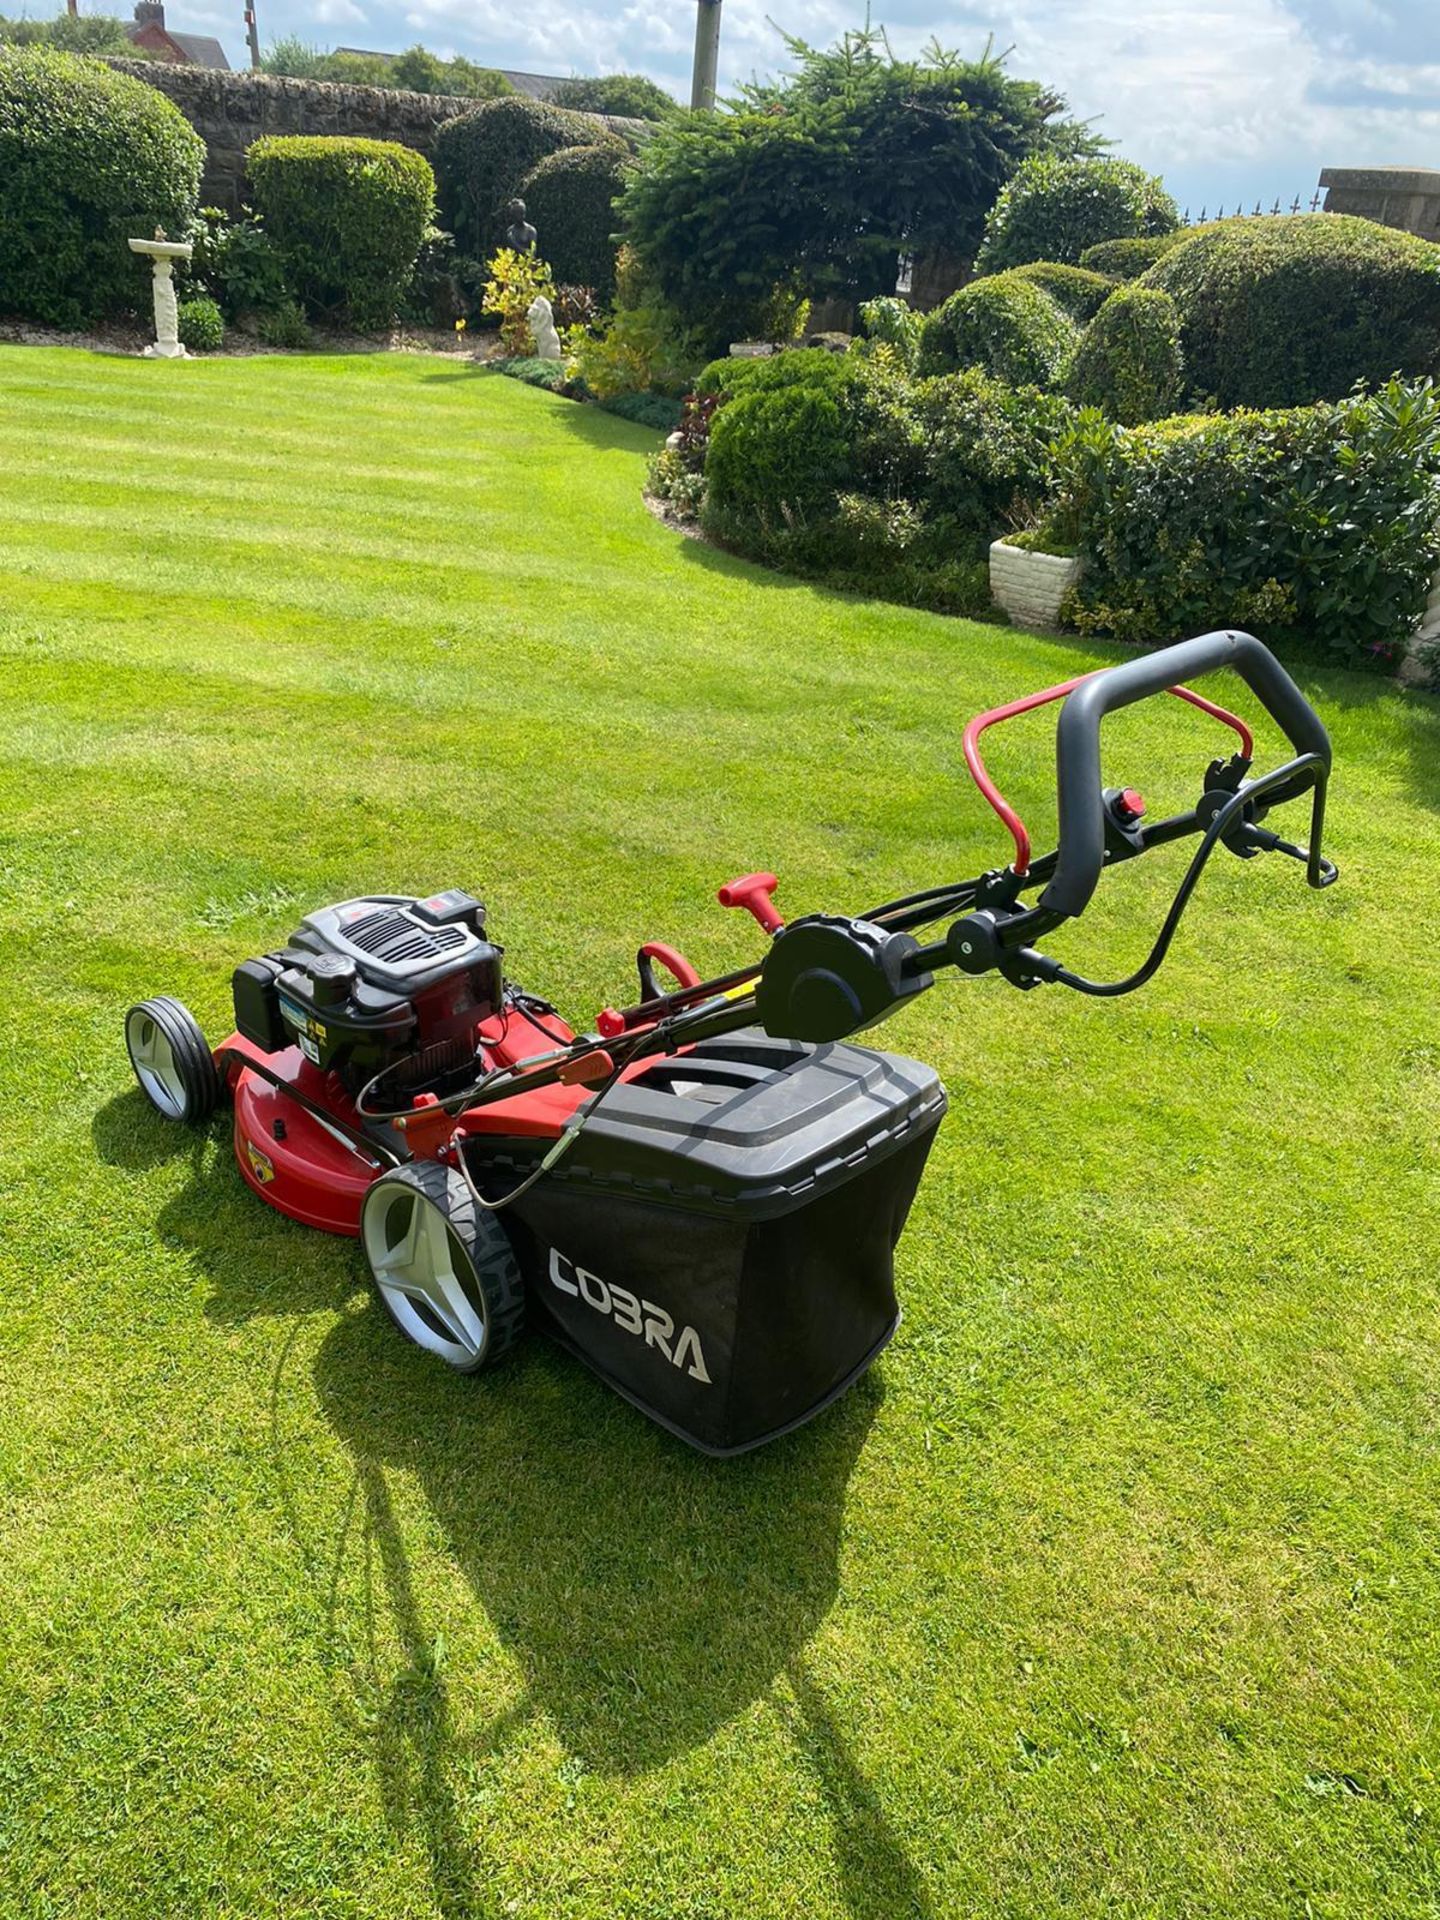 NEW AND UNUSED COBRA MX515SPBI LAWN MOWER, ELECTRIC START, 20" DECK, MANUAL INCLUDED *NO VAT* - Image 4 of 6